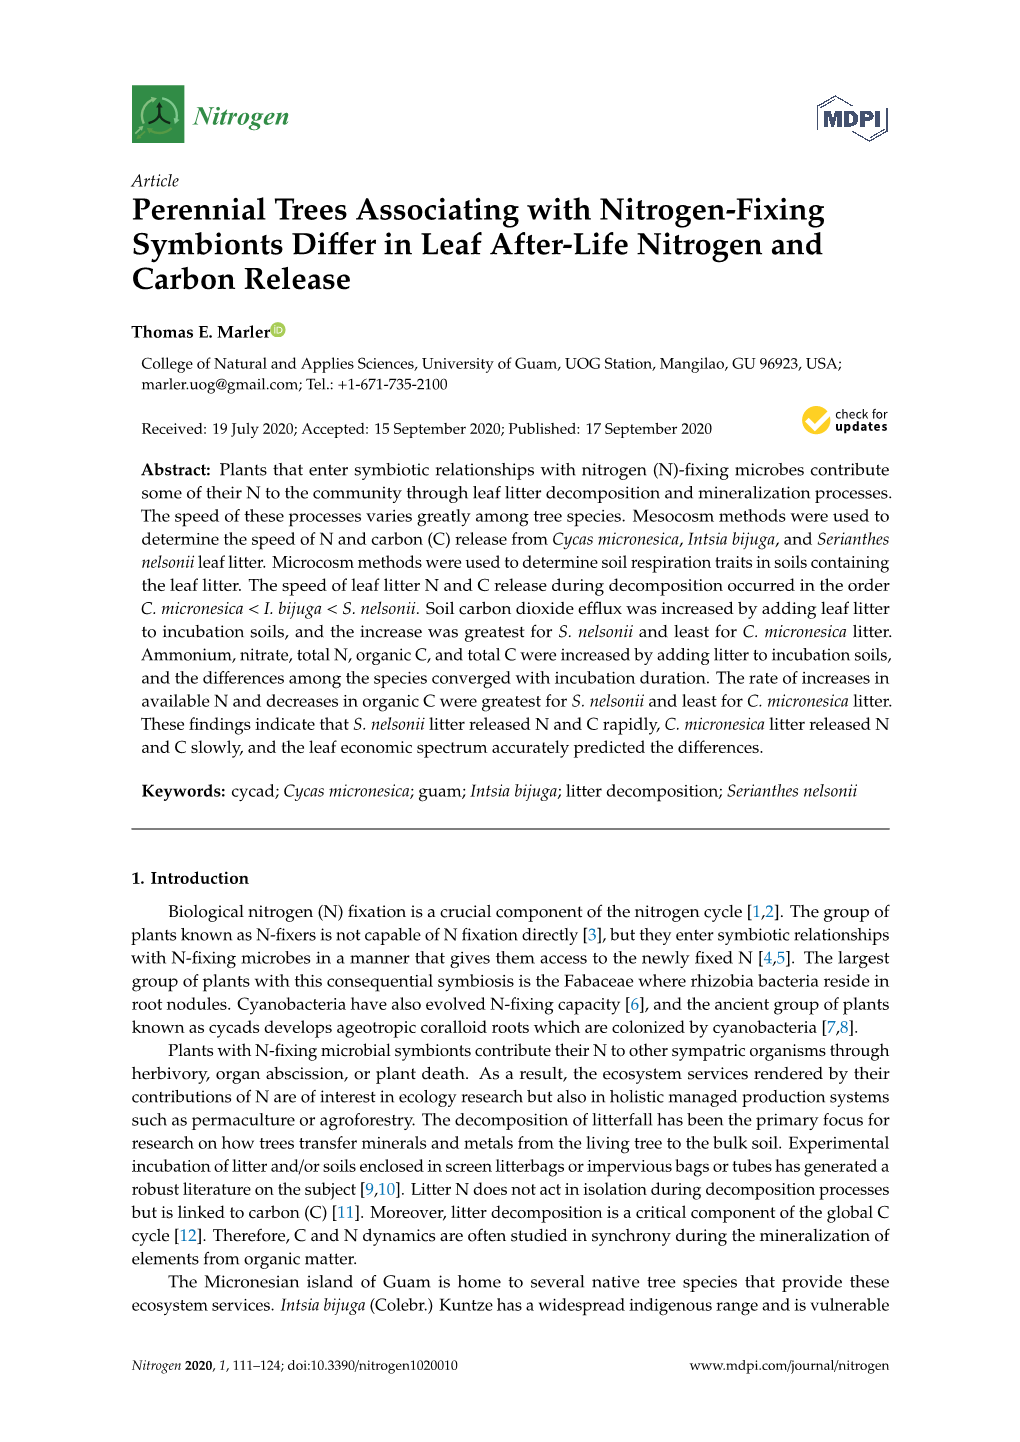 Perennial Trees Associating with Nitrogen-Fixing Symbionts Differ In